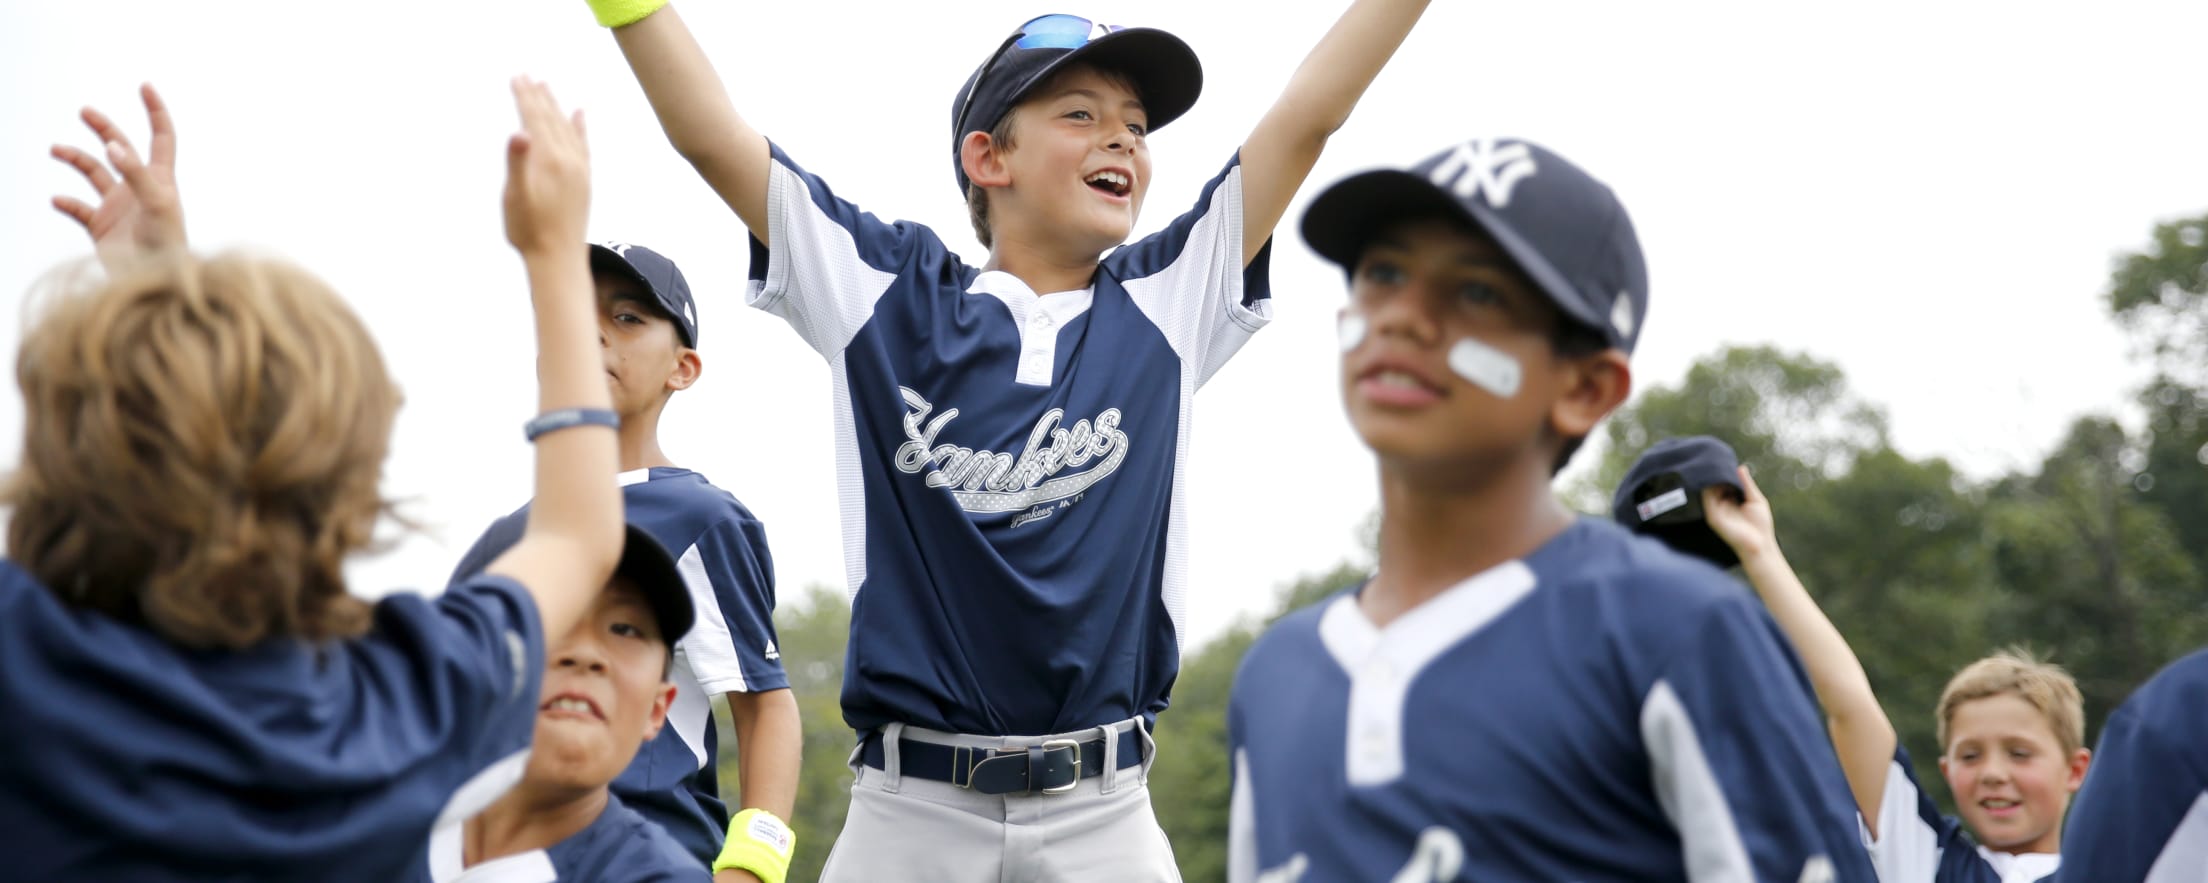 Baseball for Toddlers & Youth Baseball Camps